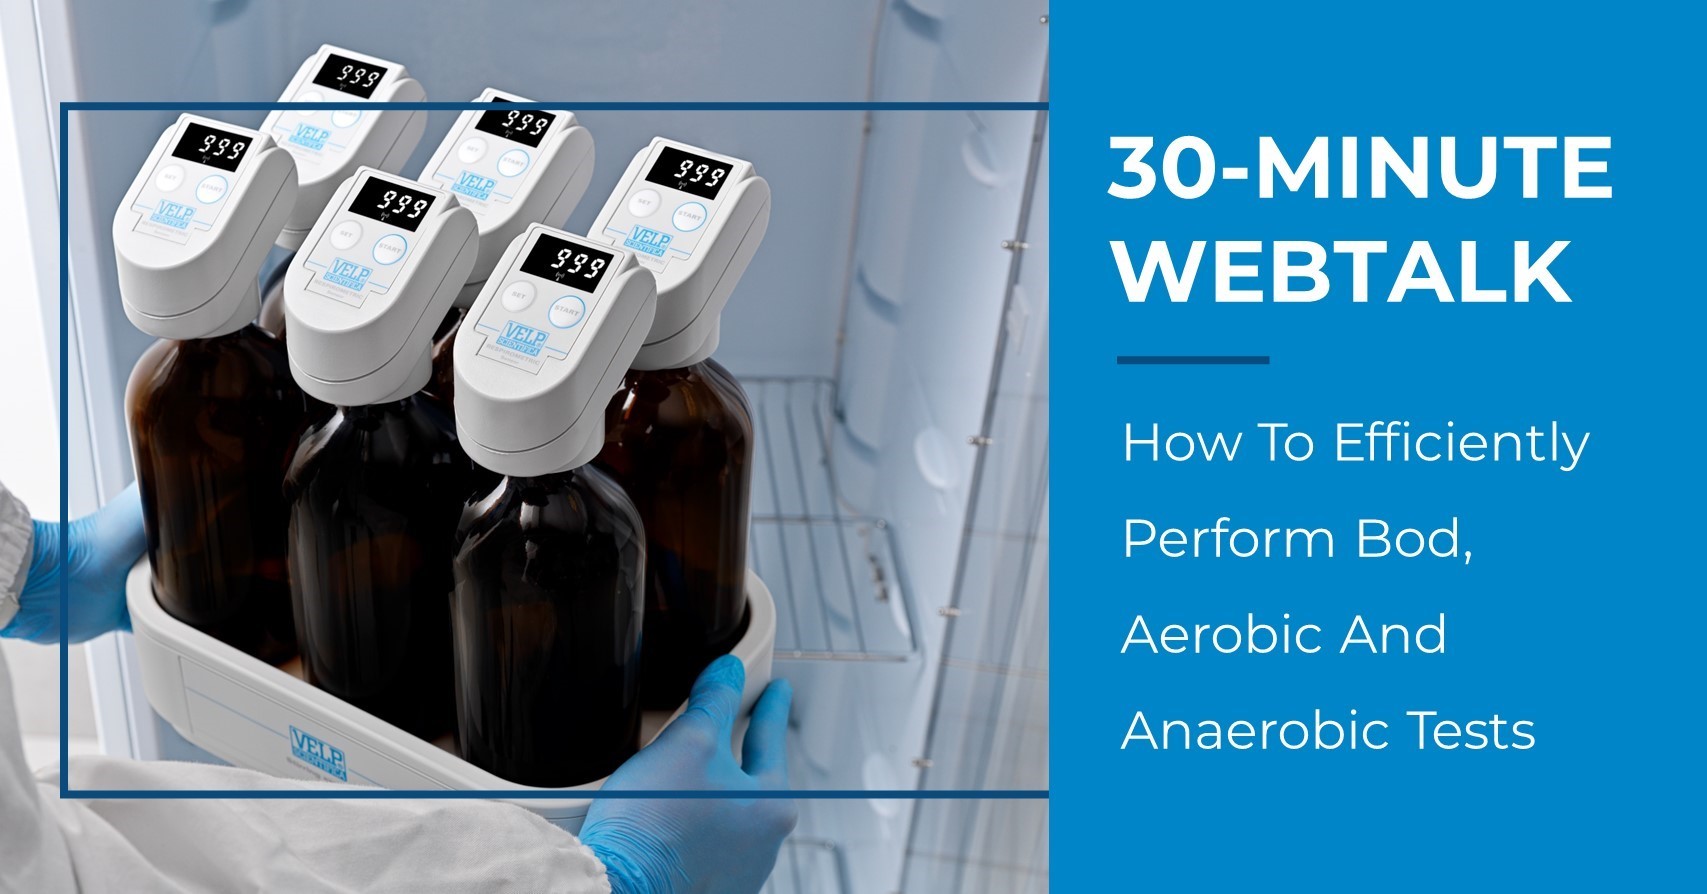 VELP WEBINAR | Register Now! Discover how To Efficiently Perform BOD, Aerobic and Anaerobic Tests